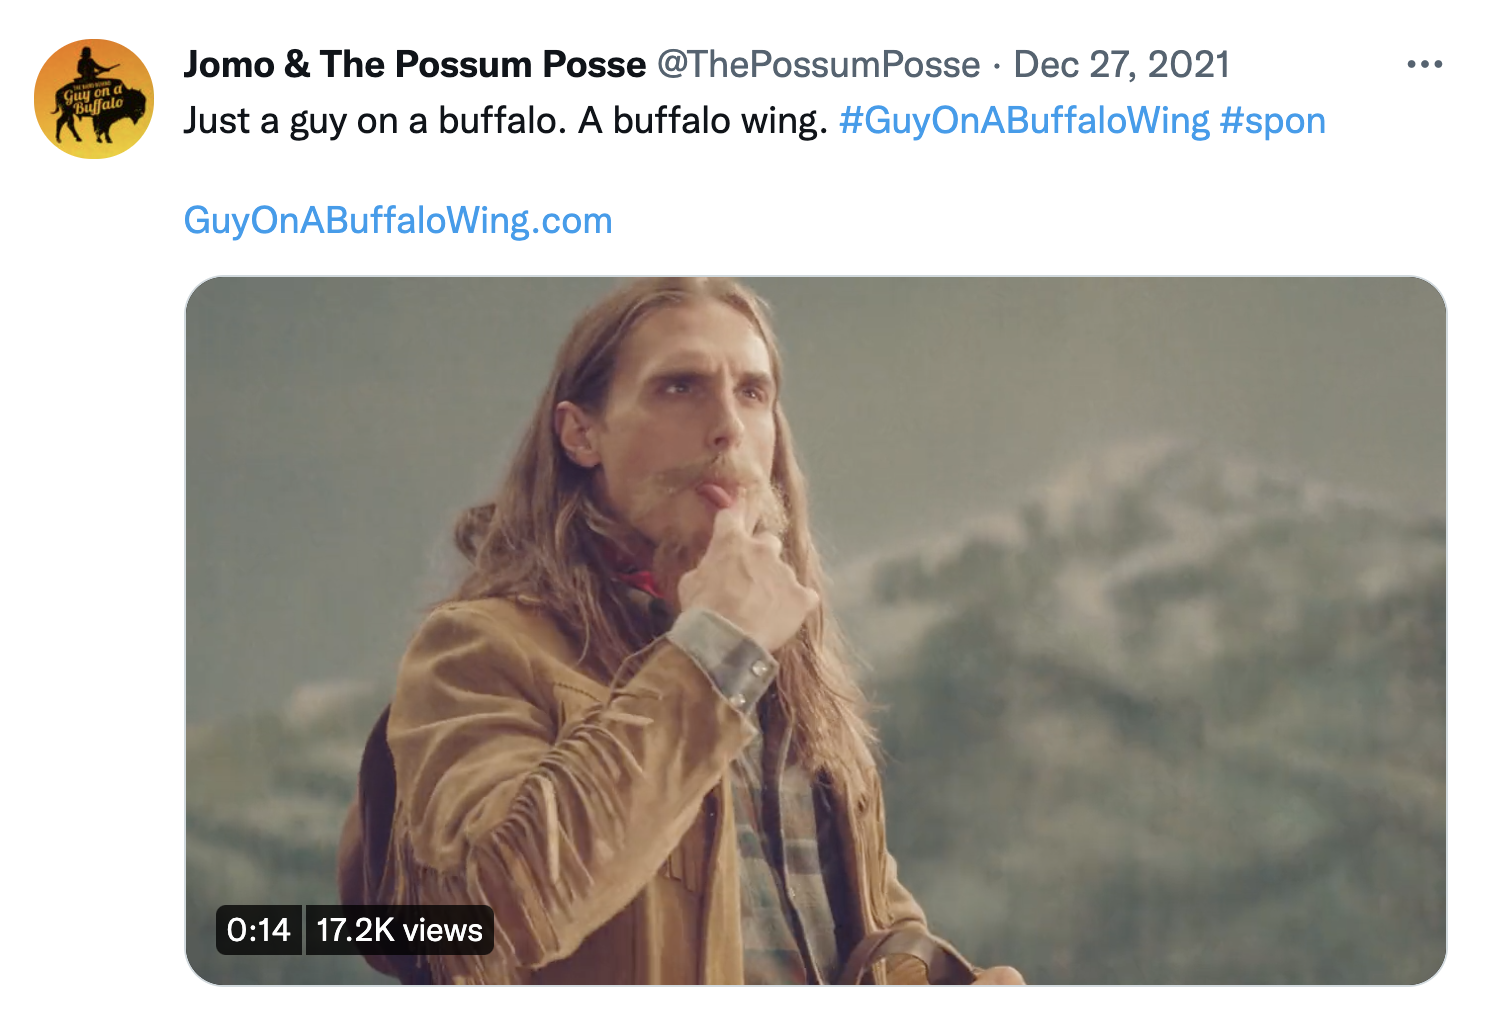 Zaxby's kicked off the campaign with a tweet by Jomo & The Possum Posse teasing just a guy on a buffalo wing, leaving everyone guessing who is behind the "Guy on a Buffalo Wing."